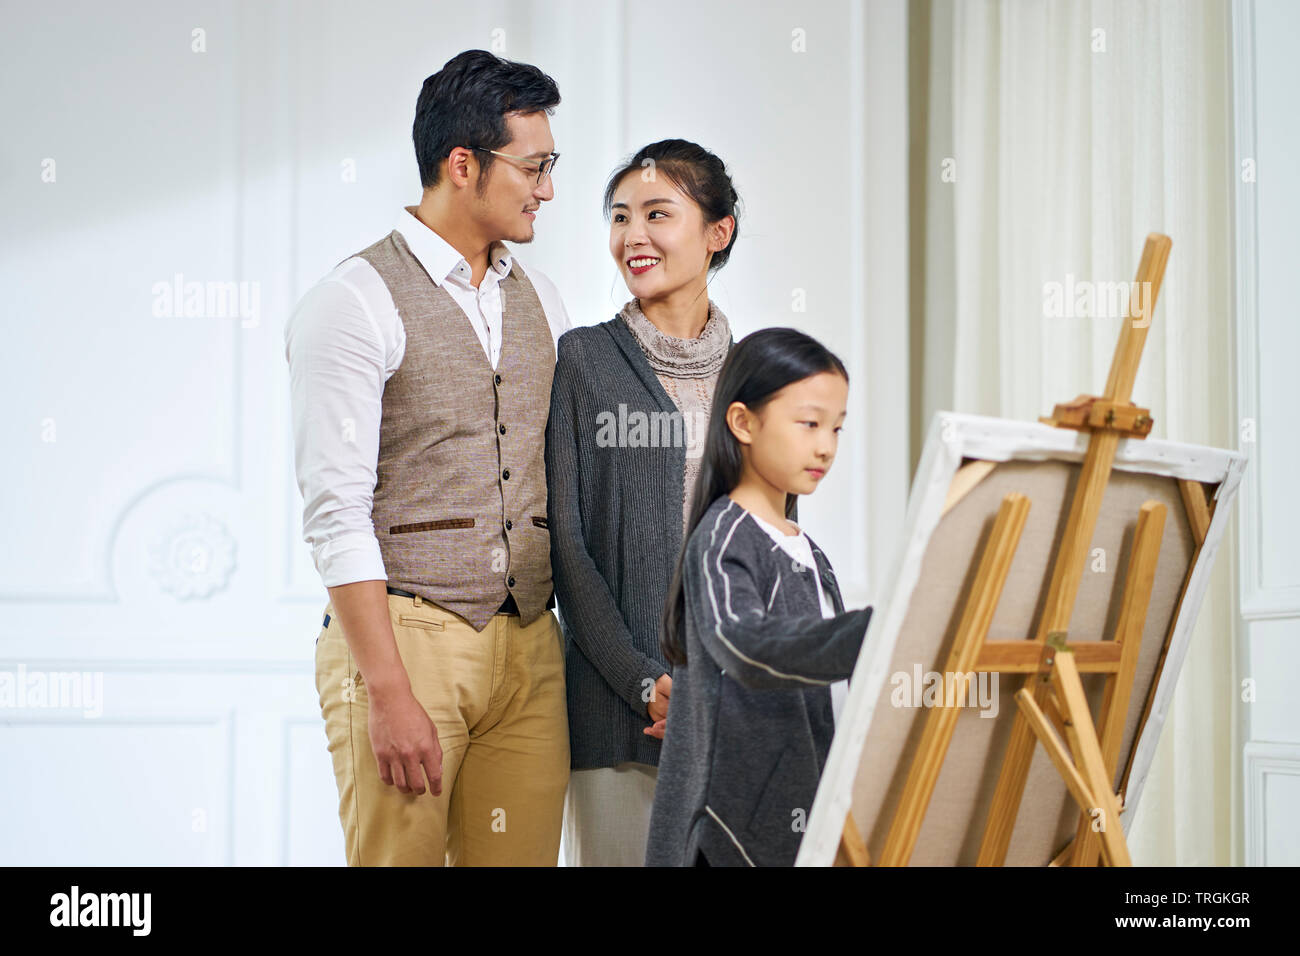 beautiful little asian girl with long black hair making a painting on canvas while parents standing behind watching, focus on parents. Stock Photo